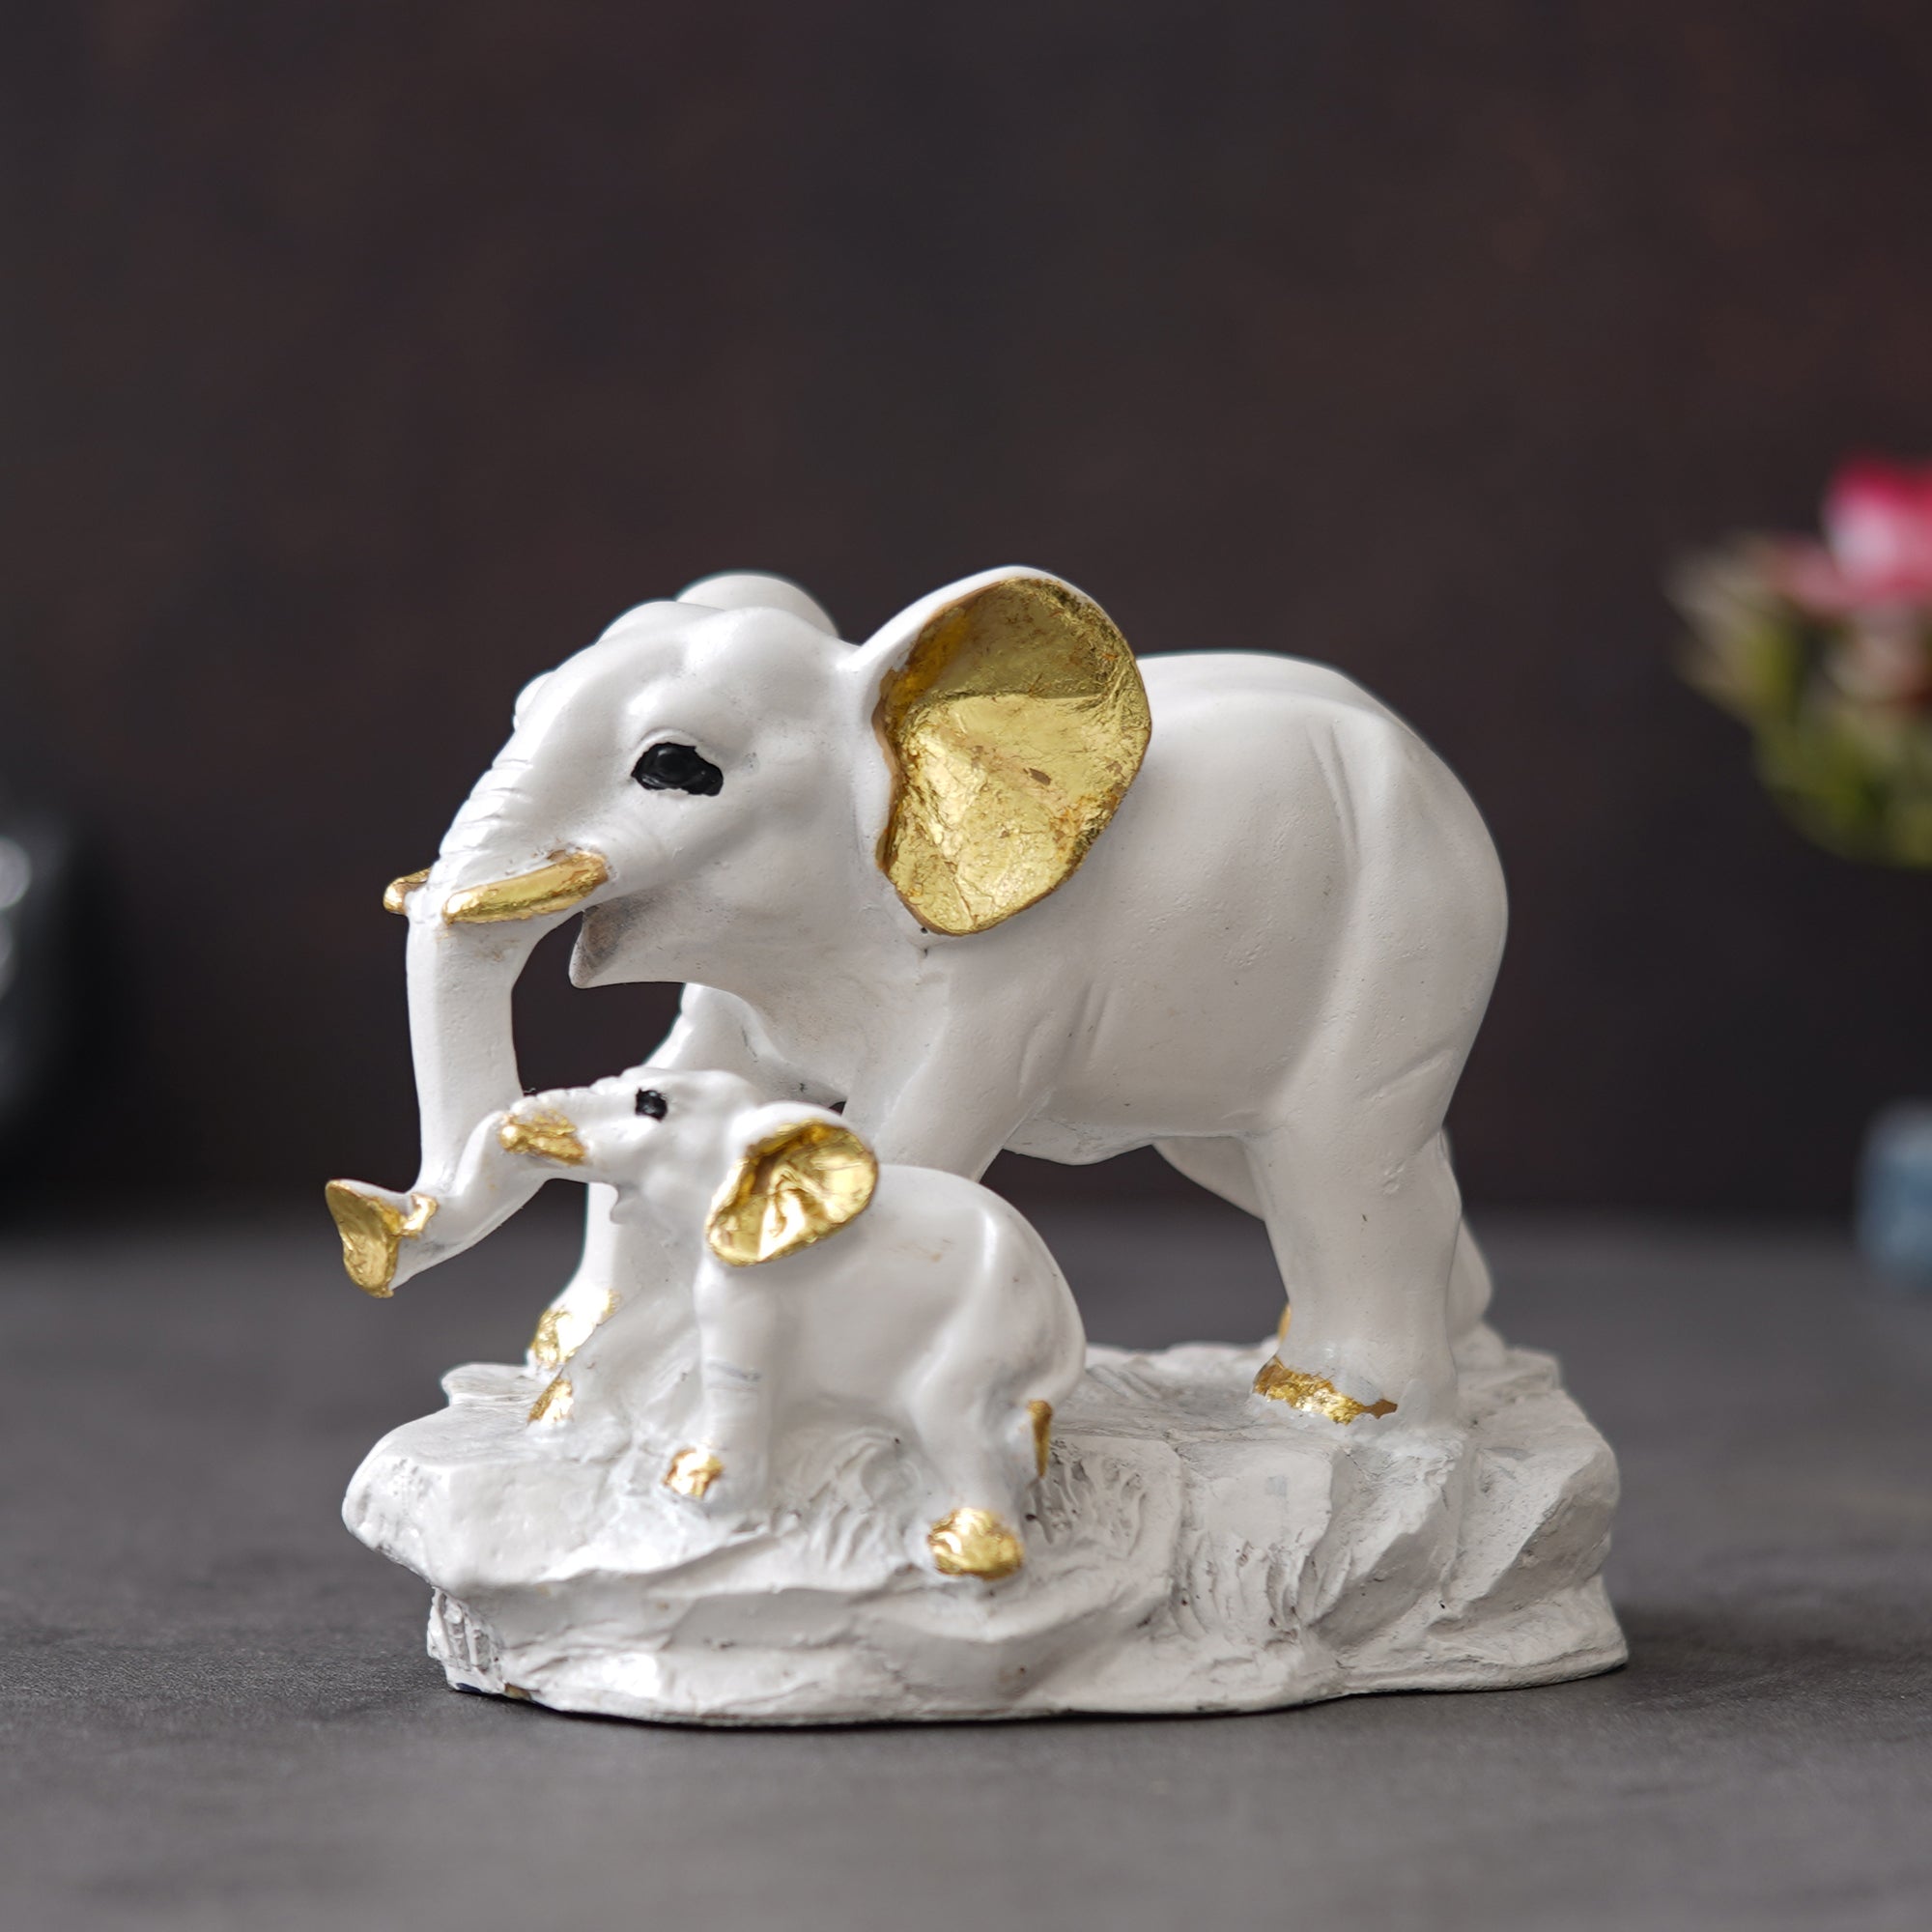 eCraftIndia White and Golden Cute Elephant with Baby Elephant Statues Animal Figurines Decorative Showpieces for Home Decor 4